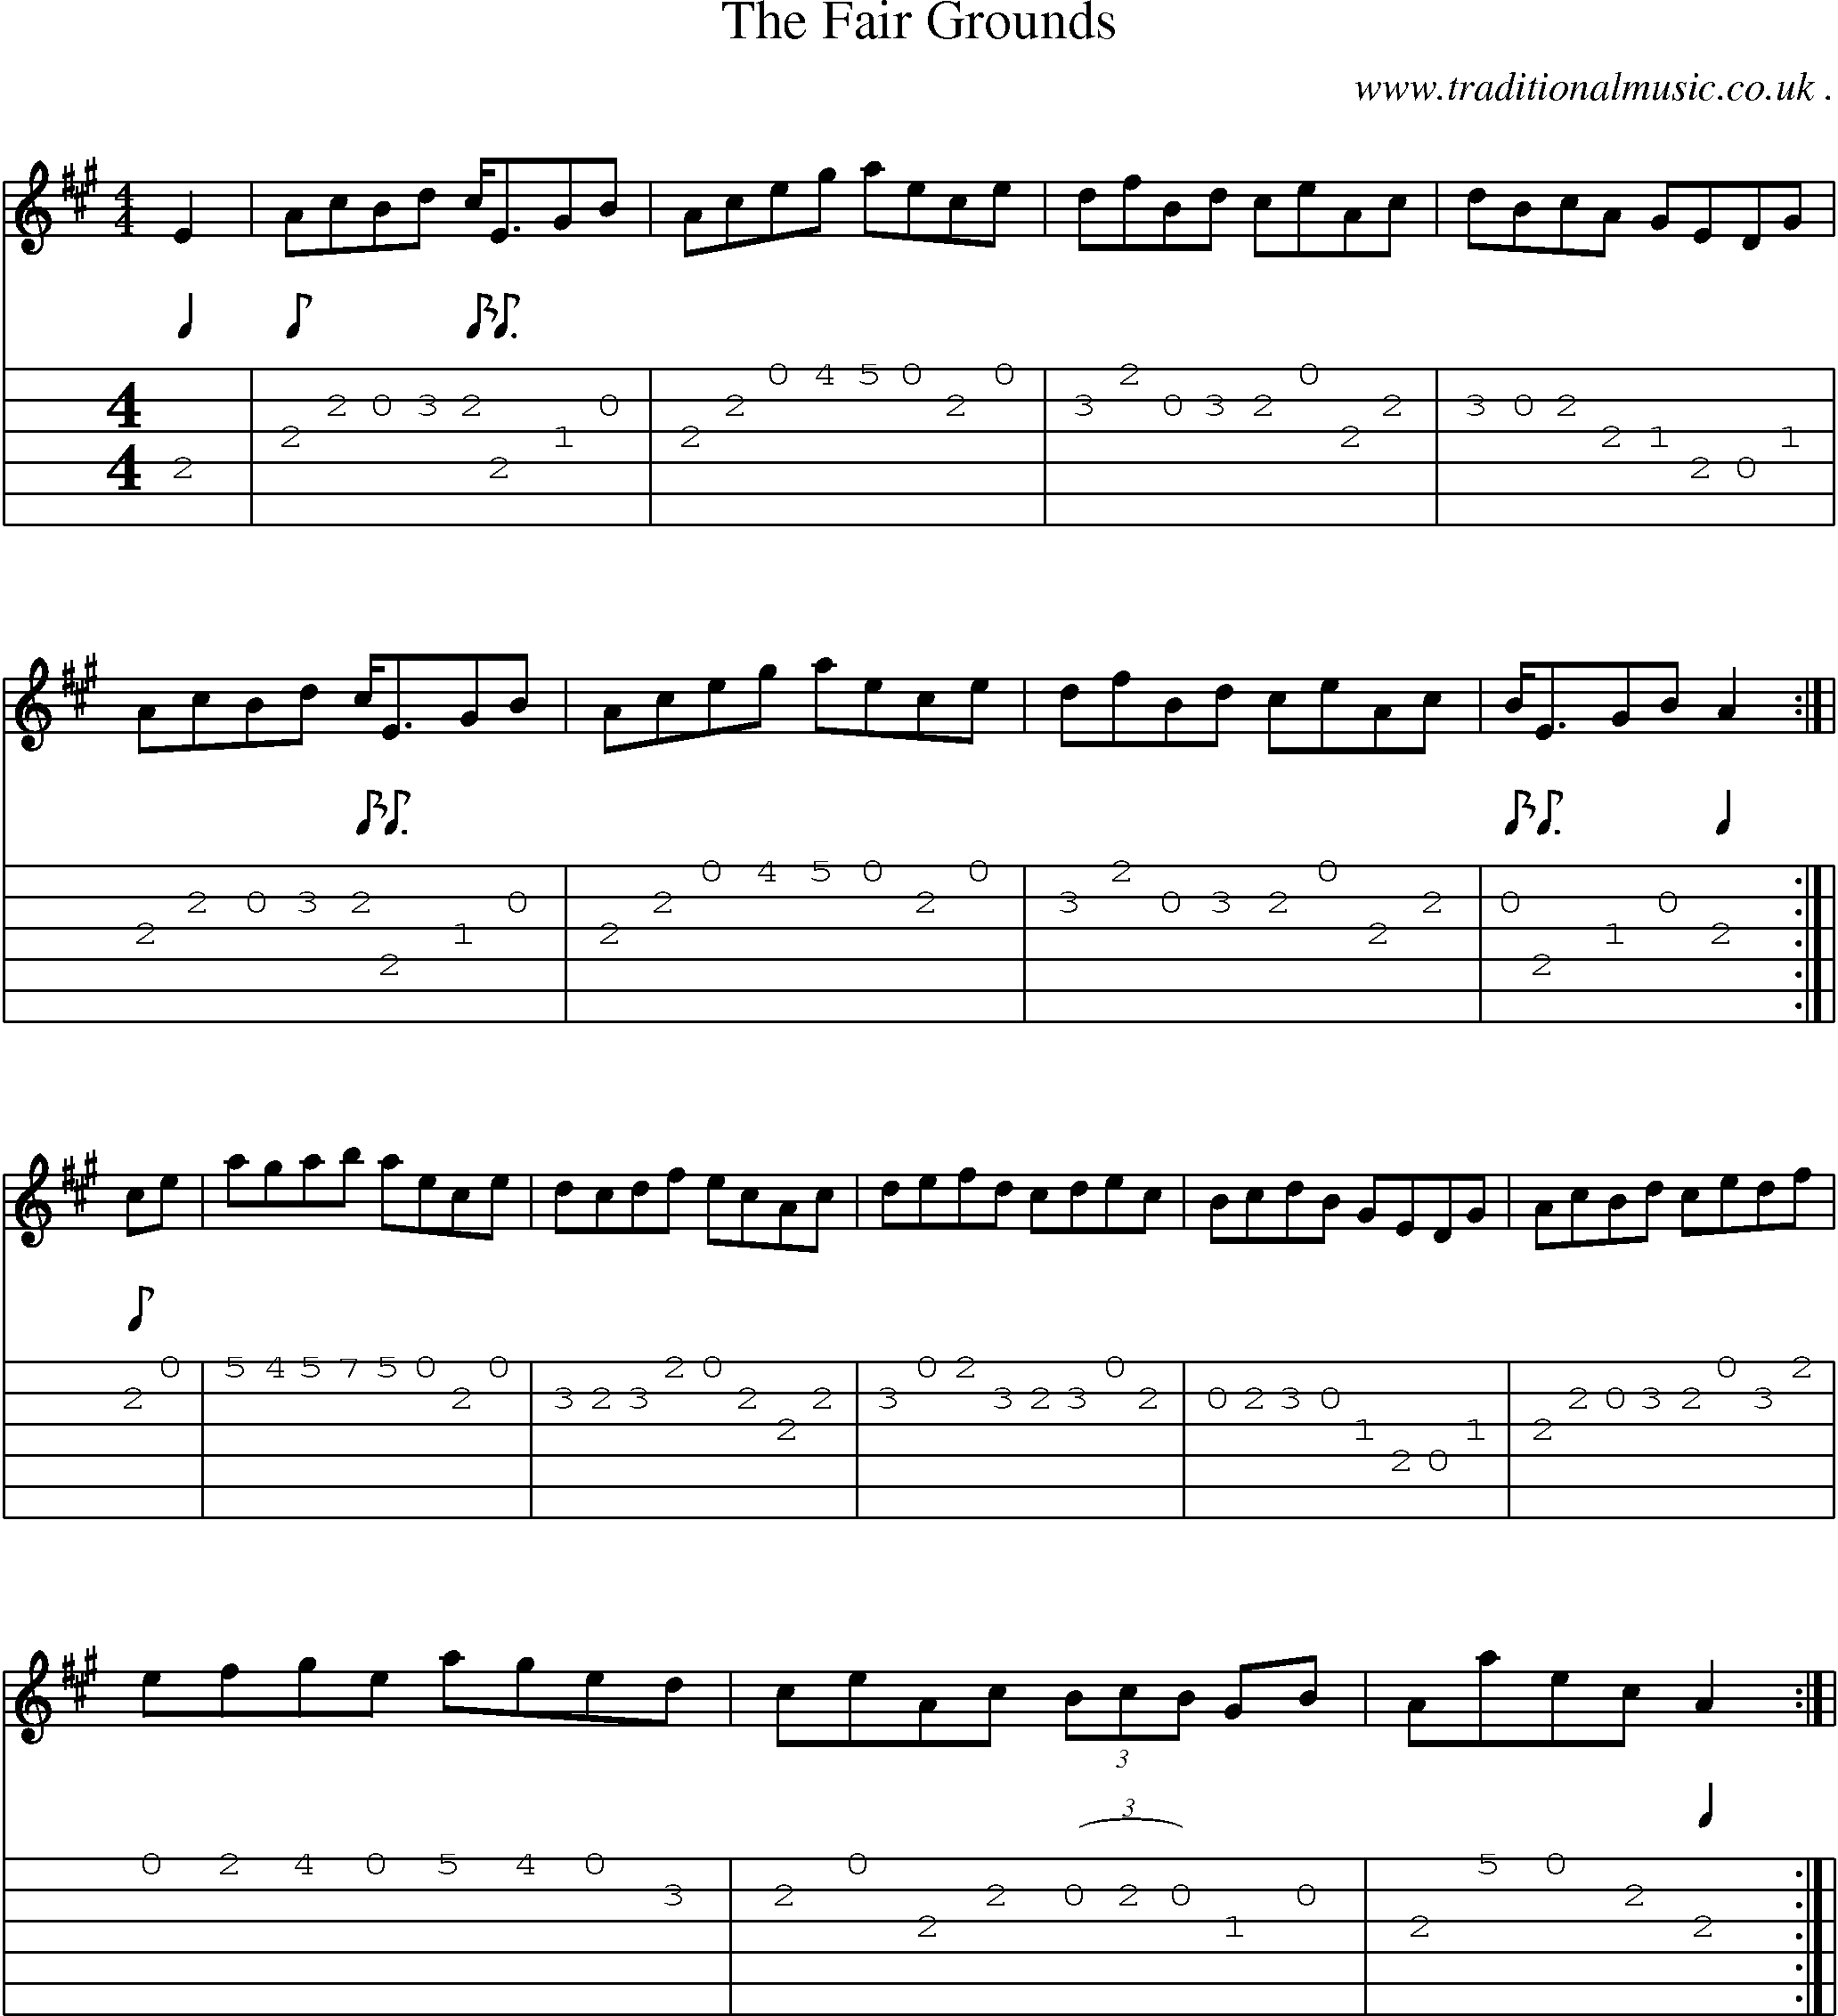 Sheet-Music and Guitar Tabs for The Fair Grounds